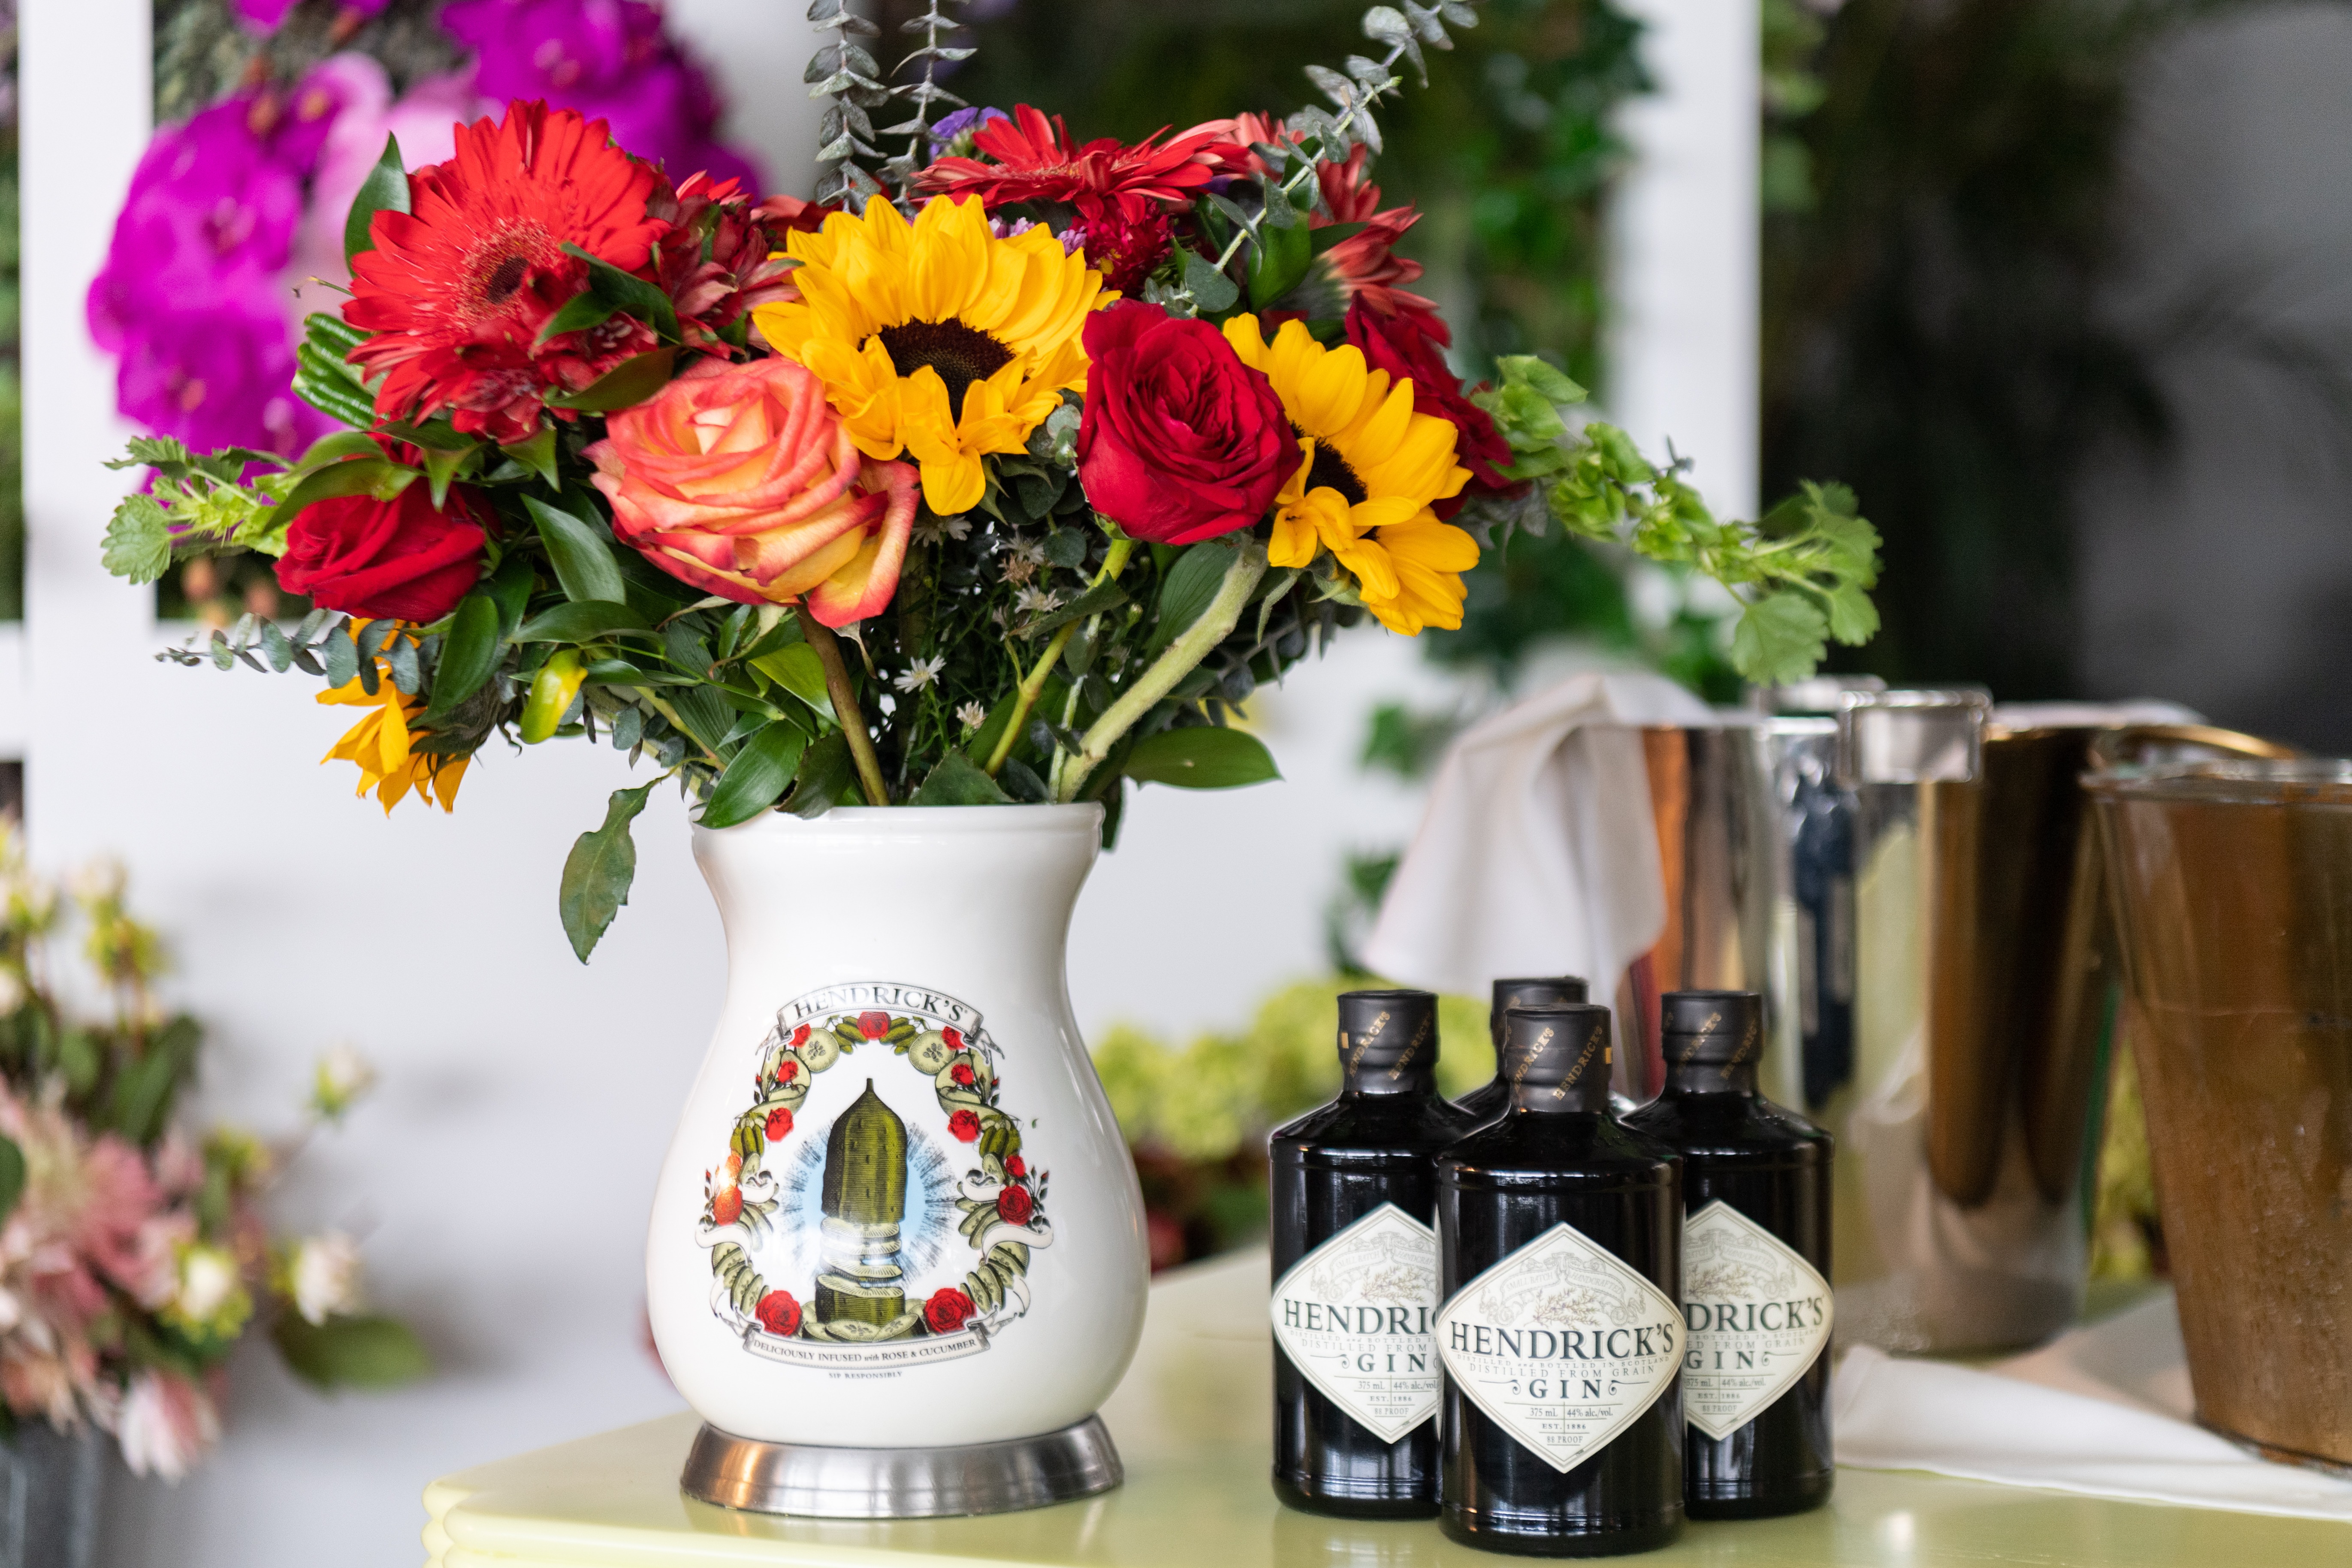 Bottles of Hendricks gin placed next to a vase of flowers